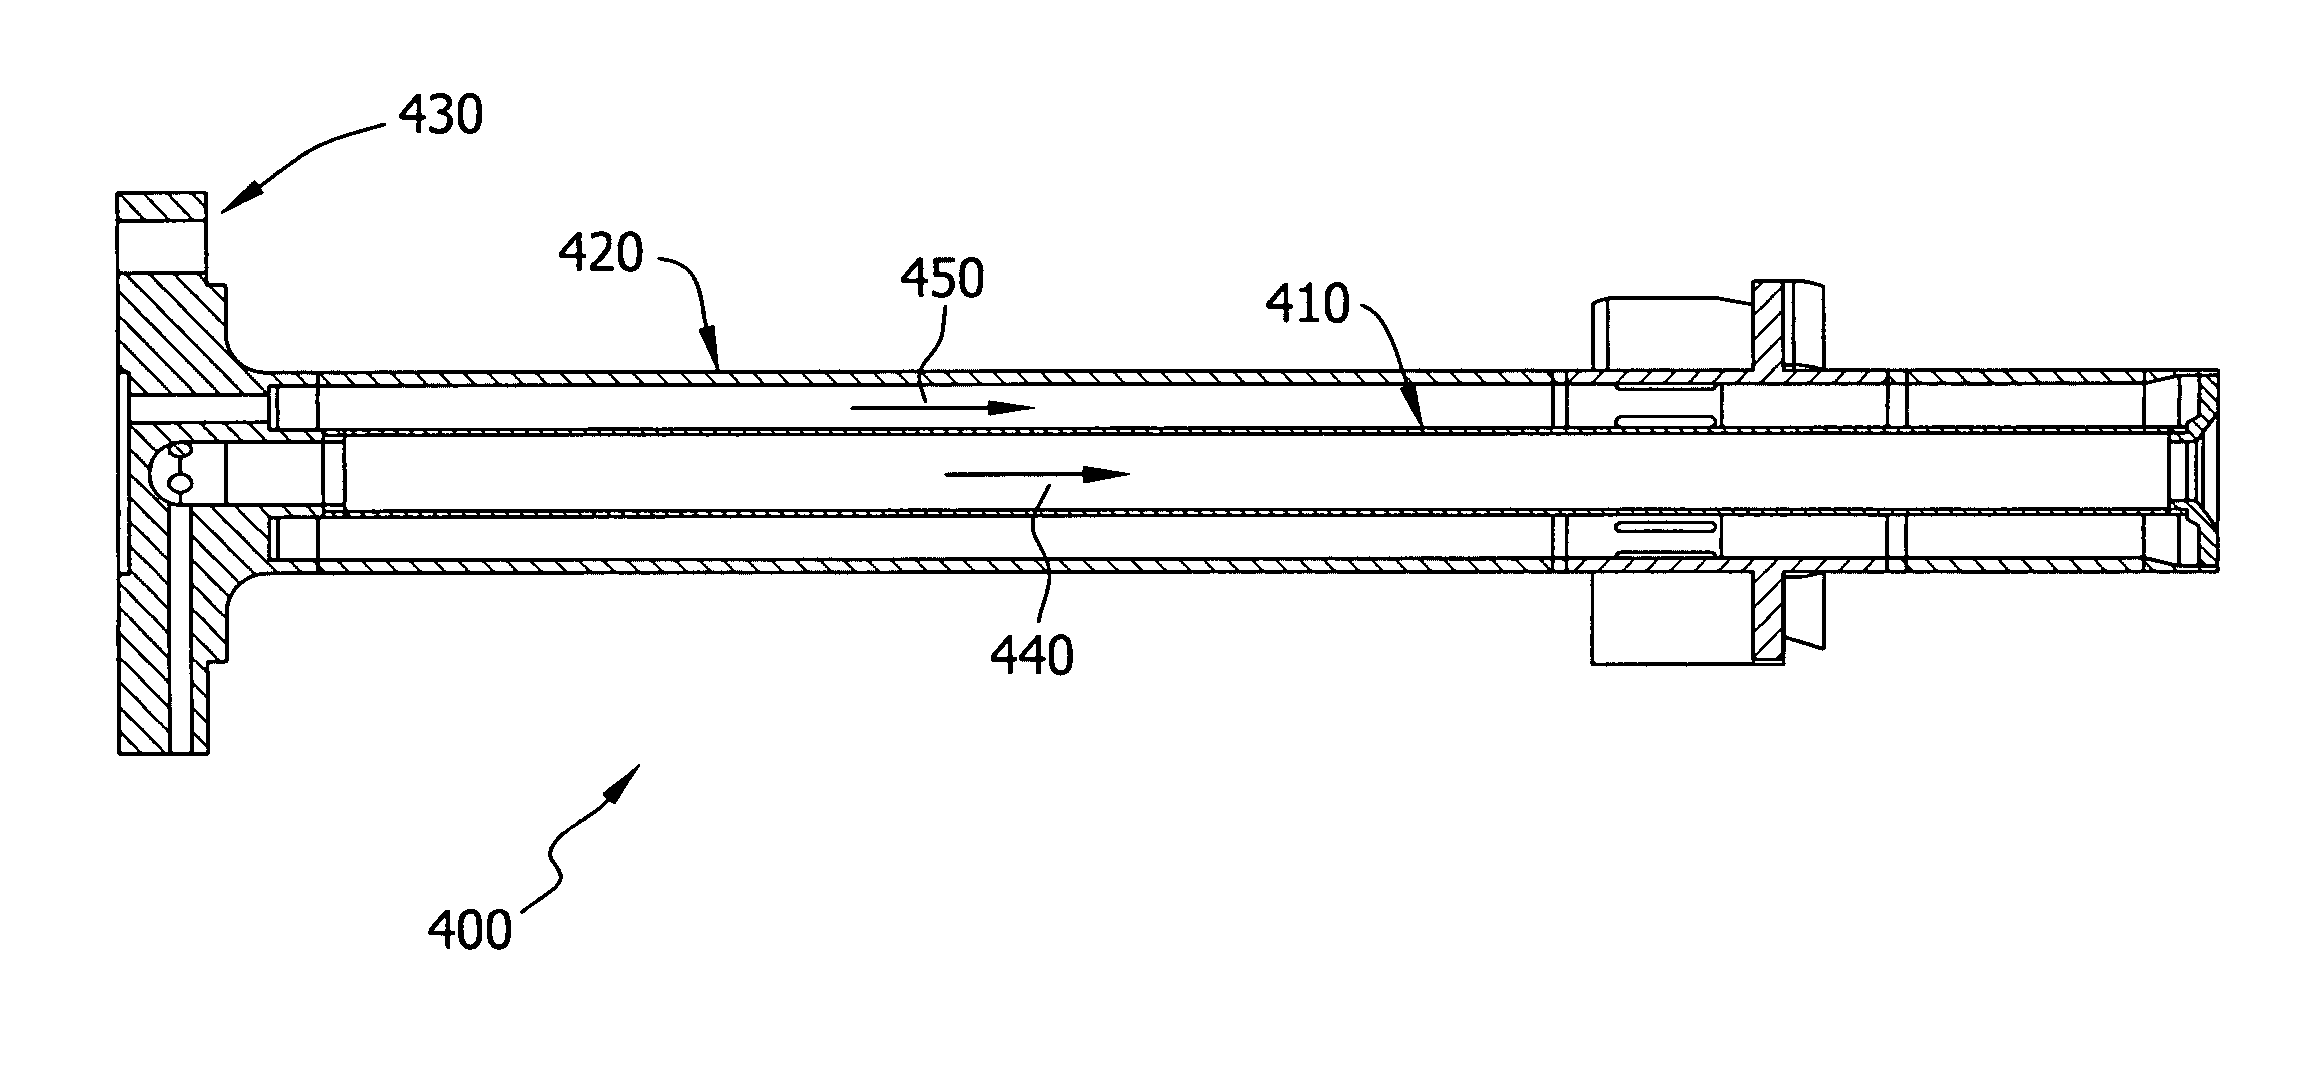 Fuel nozzle assembly for use with a gas turbine engine and method of assembling same